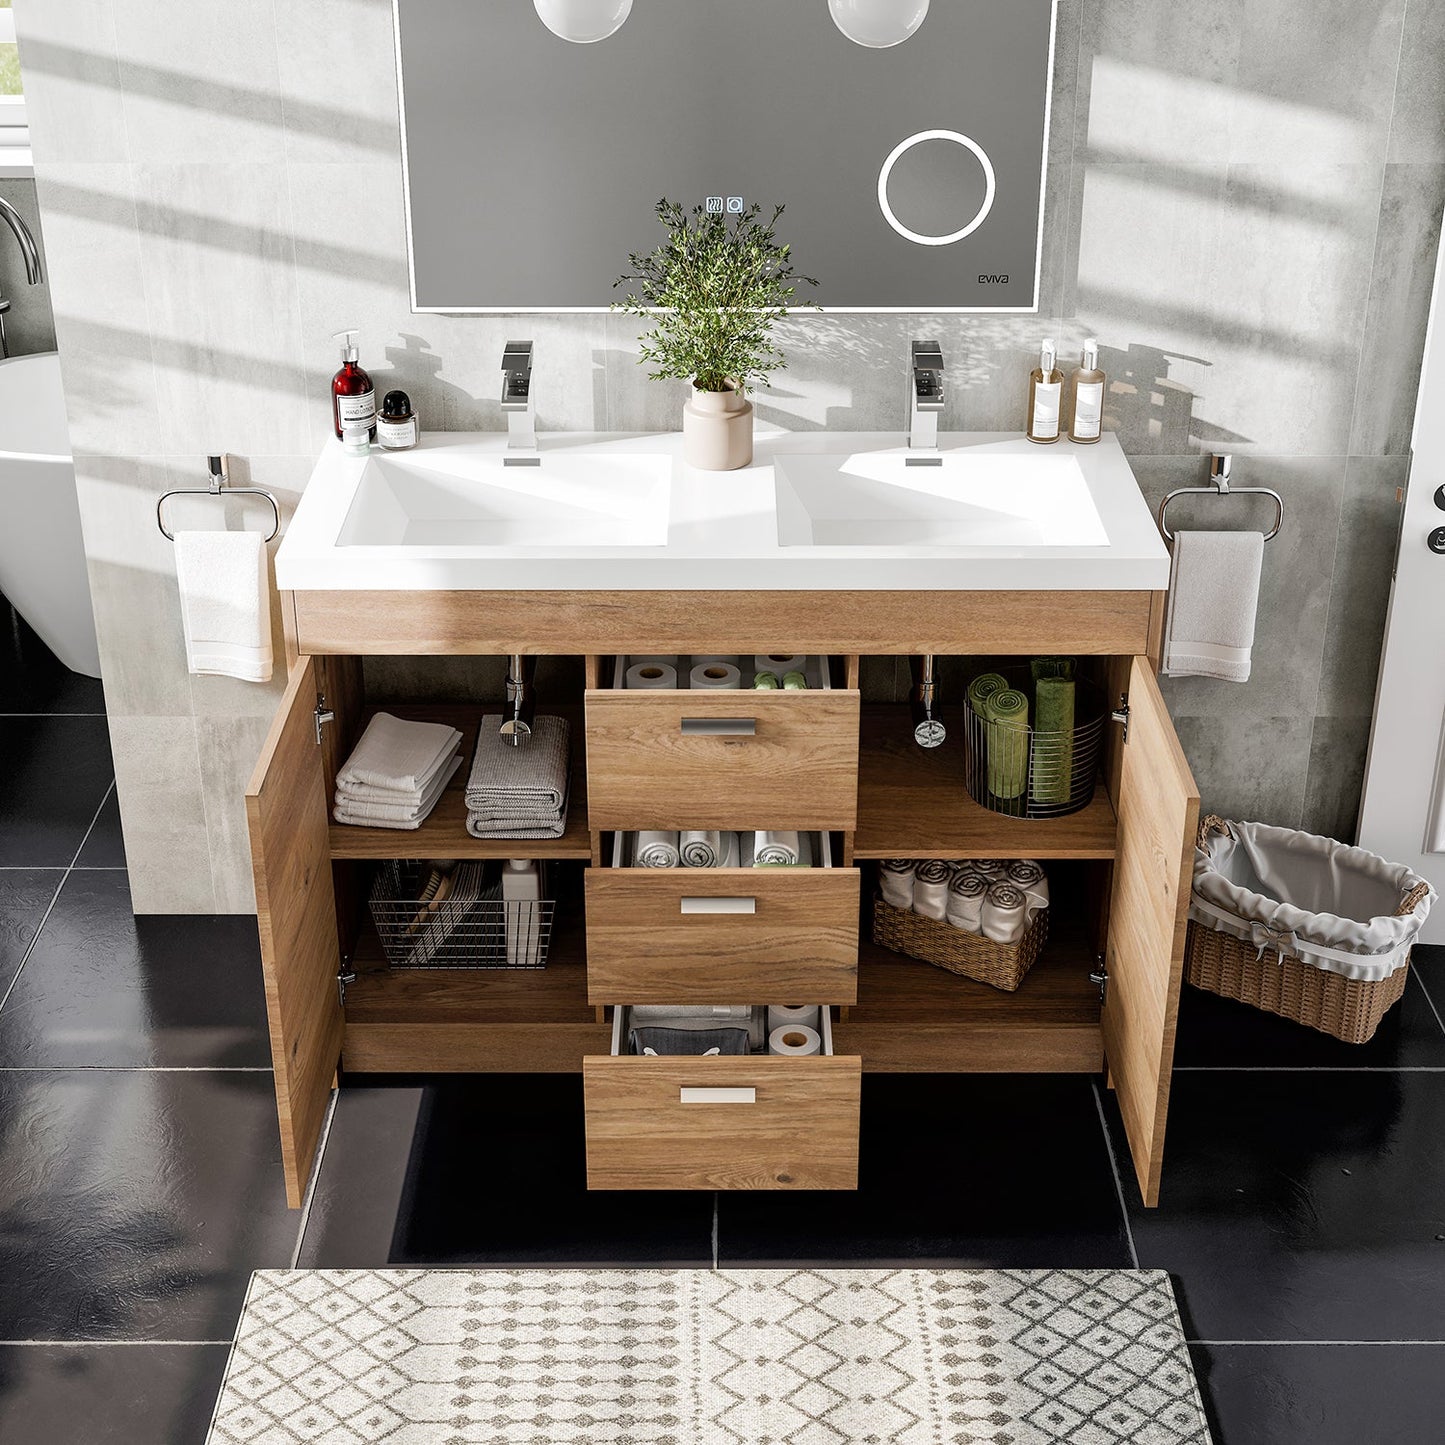 Lugano 48"W x 20"D Natural Oak Double Sink Bathroom Vanity with Acrylic Countertop and Integrated Sink